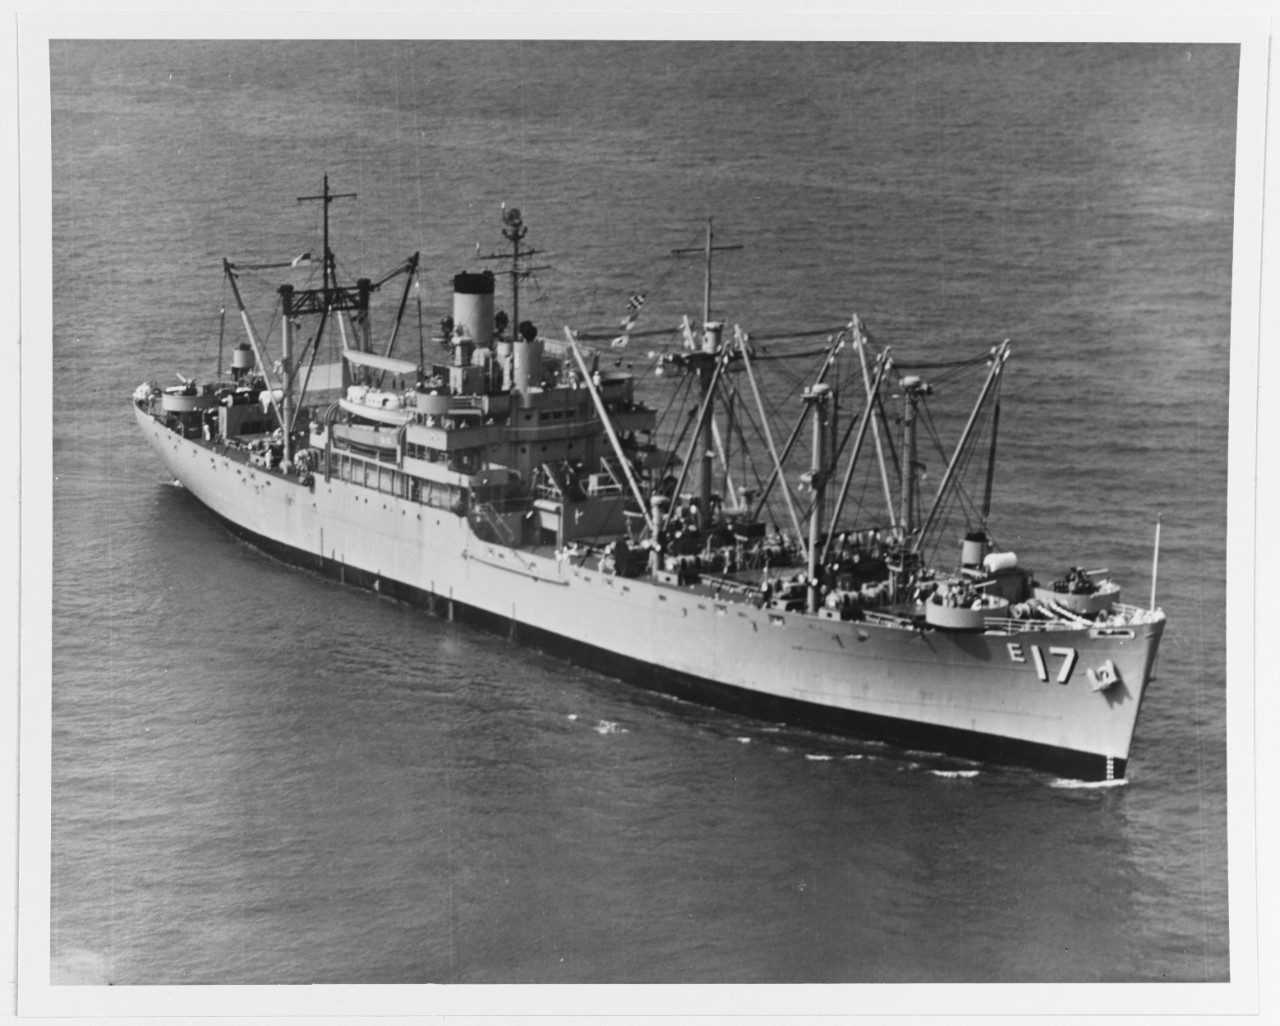 USS GREAT SITKIN (AE-17)